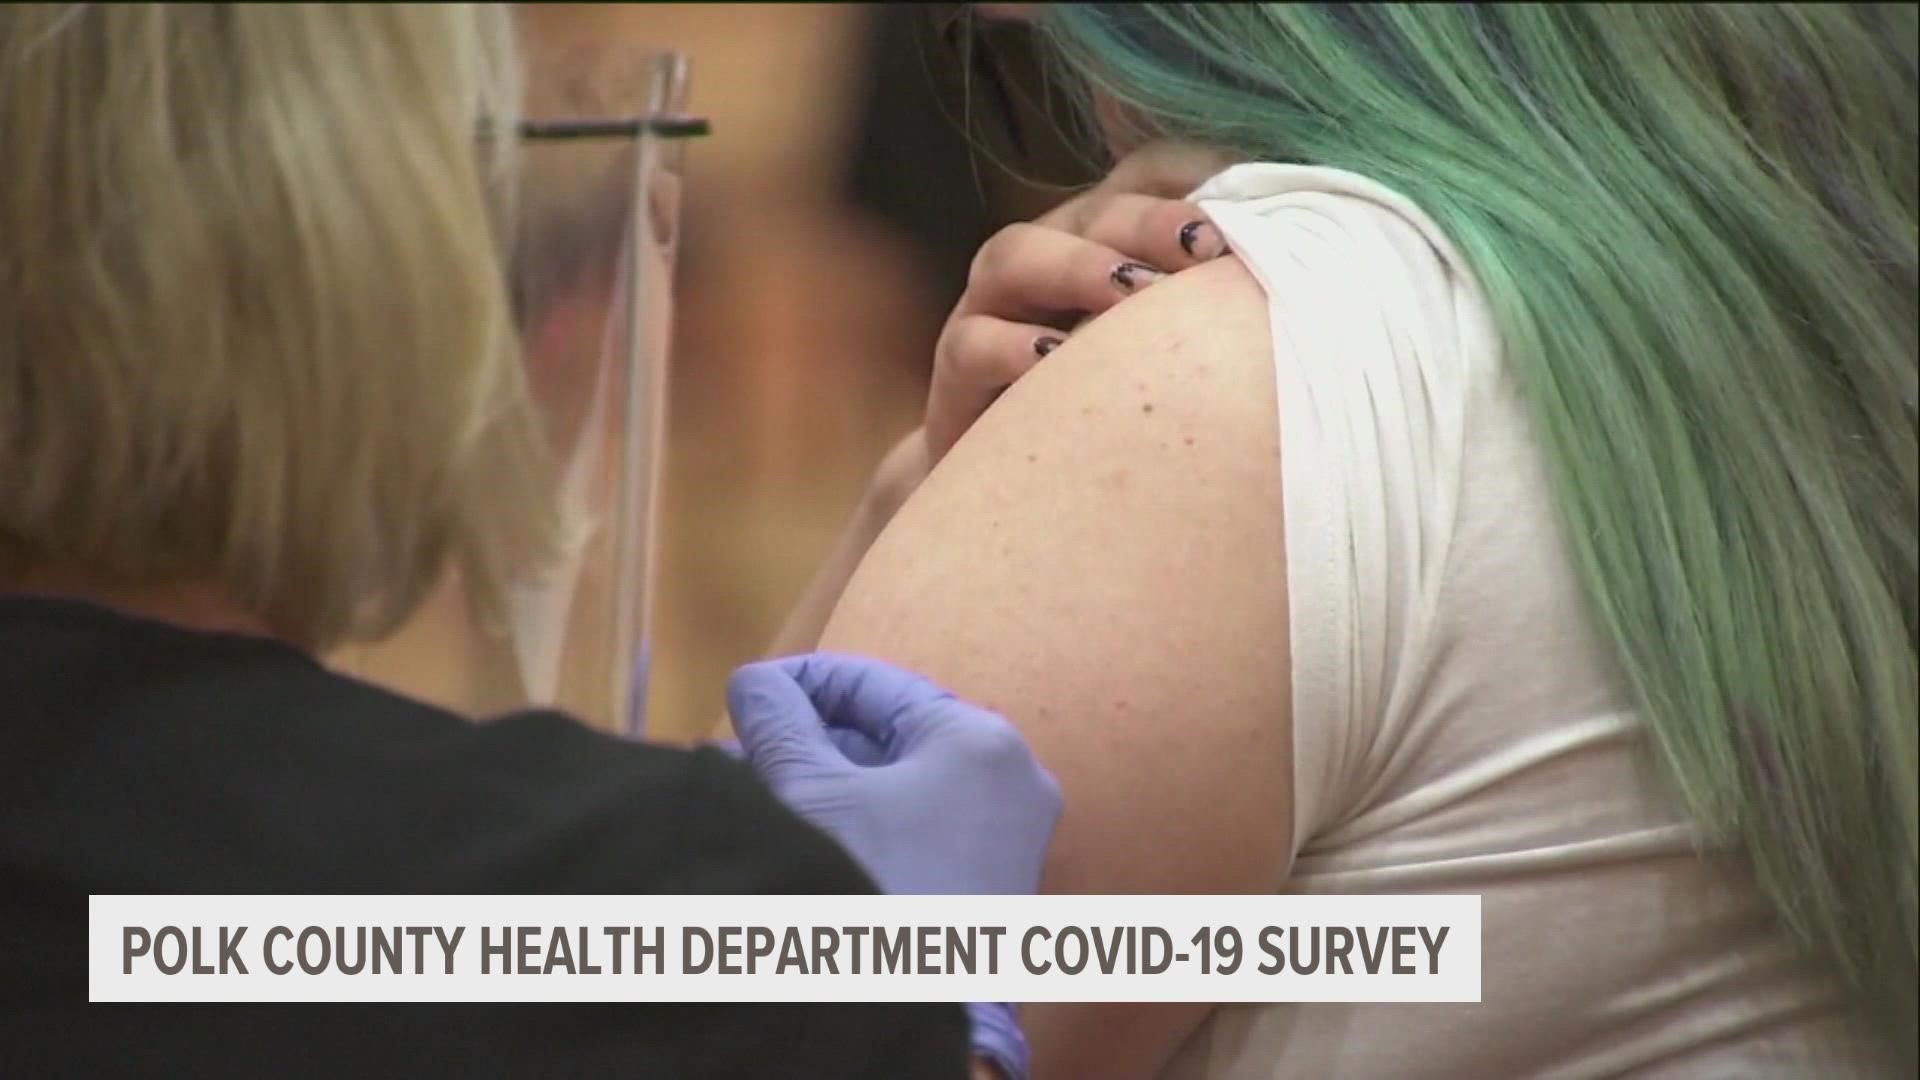 If you take an at-home COVID-19 test and test positive, the Polk County Health Department says it wants to know about it.